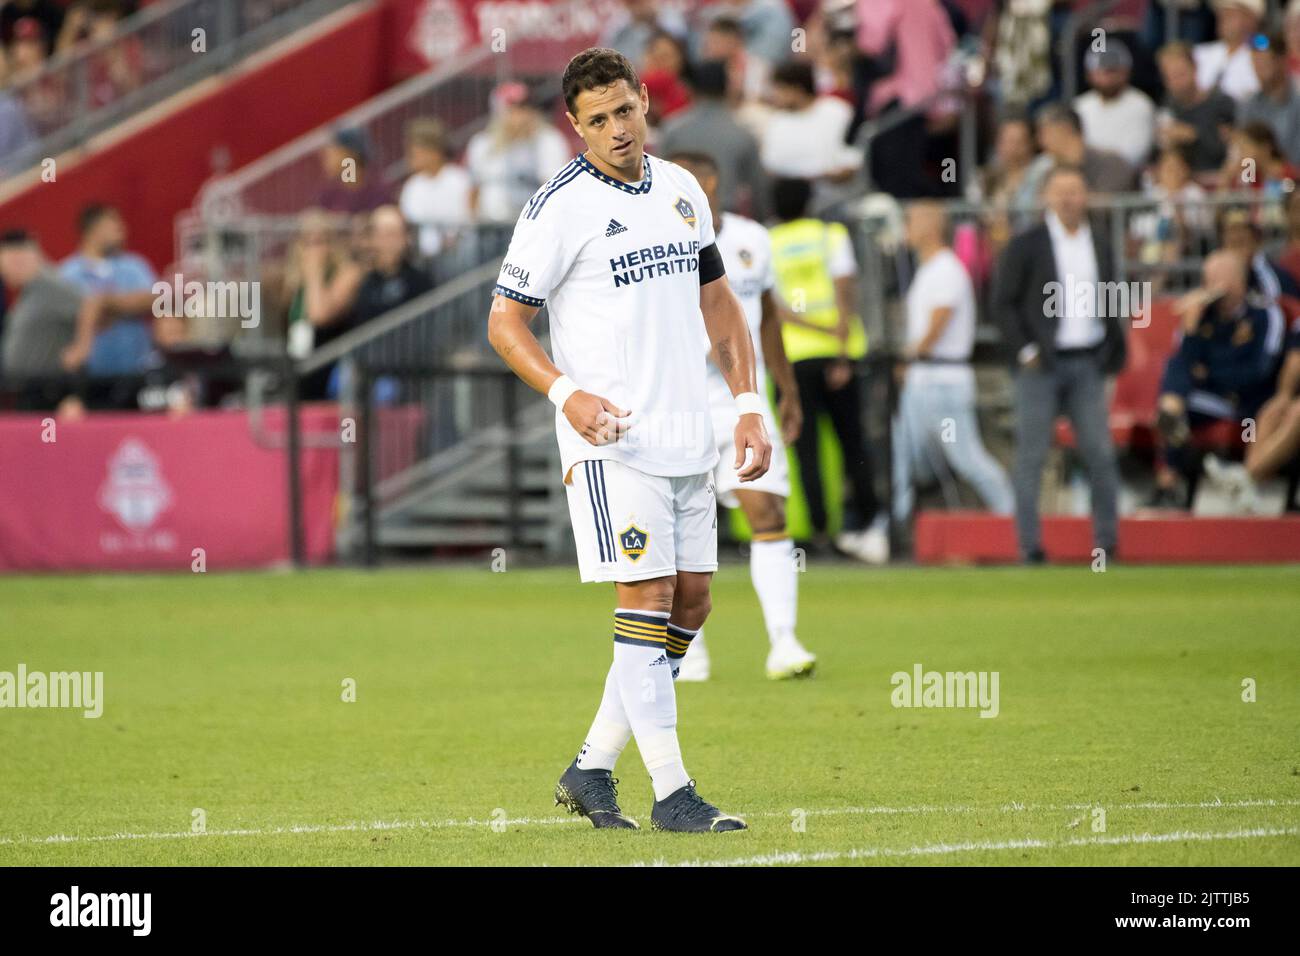 Javier Hernandez Balcazar aka Chicharito (14) in action during the MLS game between Toronto FC and LA Galaxy at BMO field in Toronto. The game ended 2-2 Stock Photo